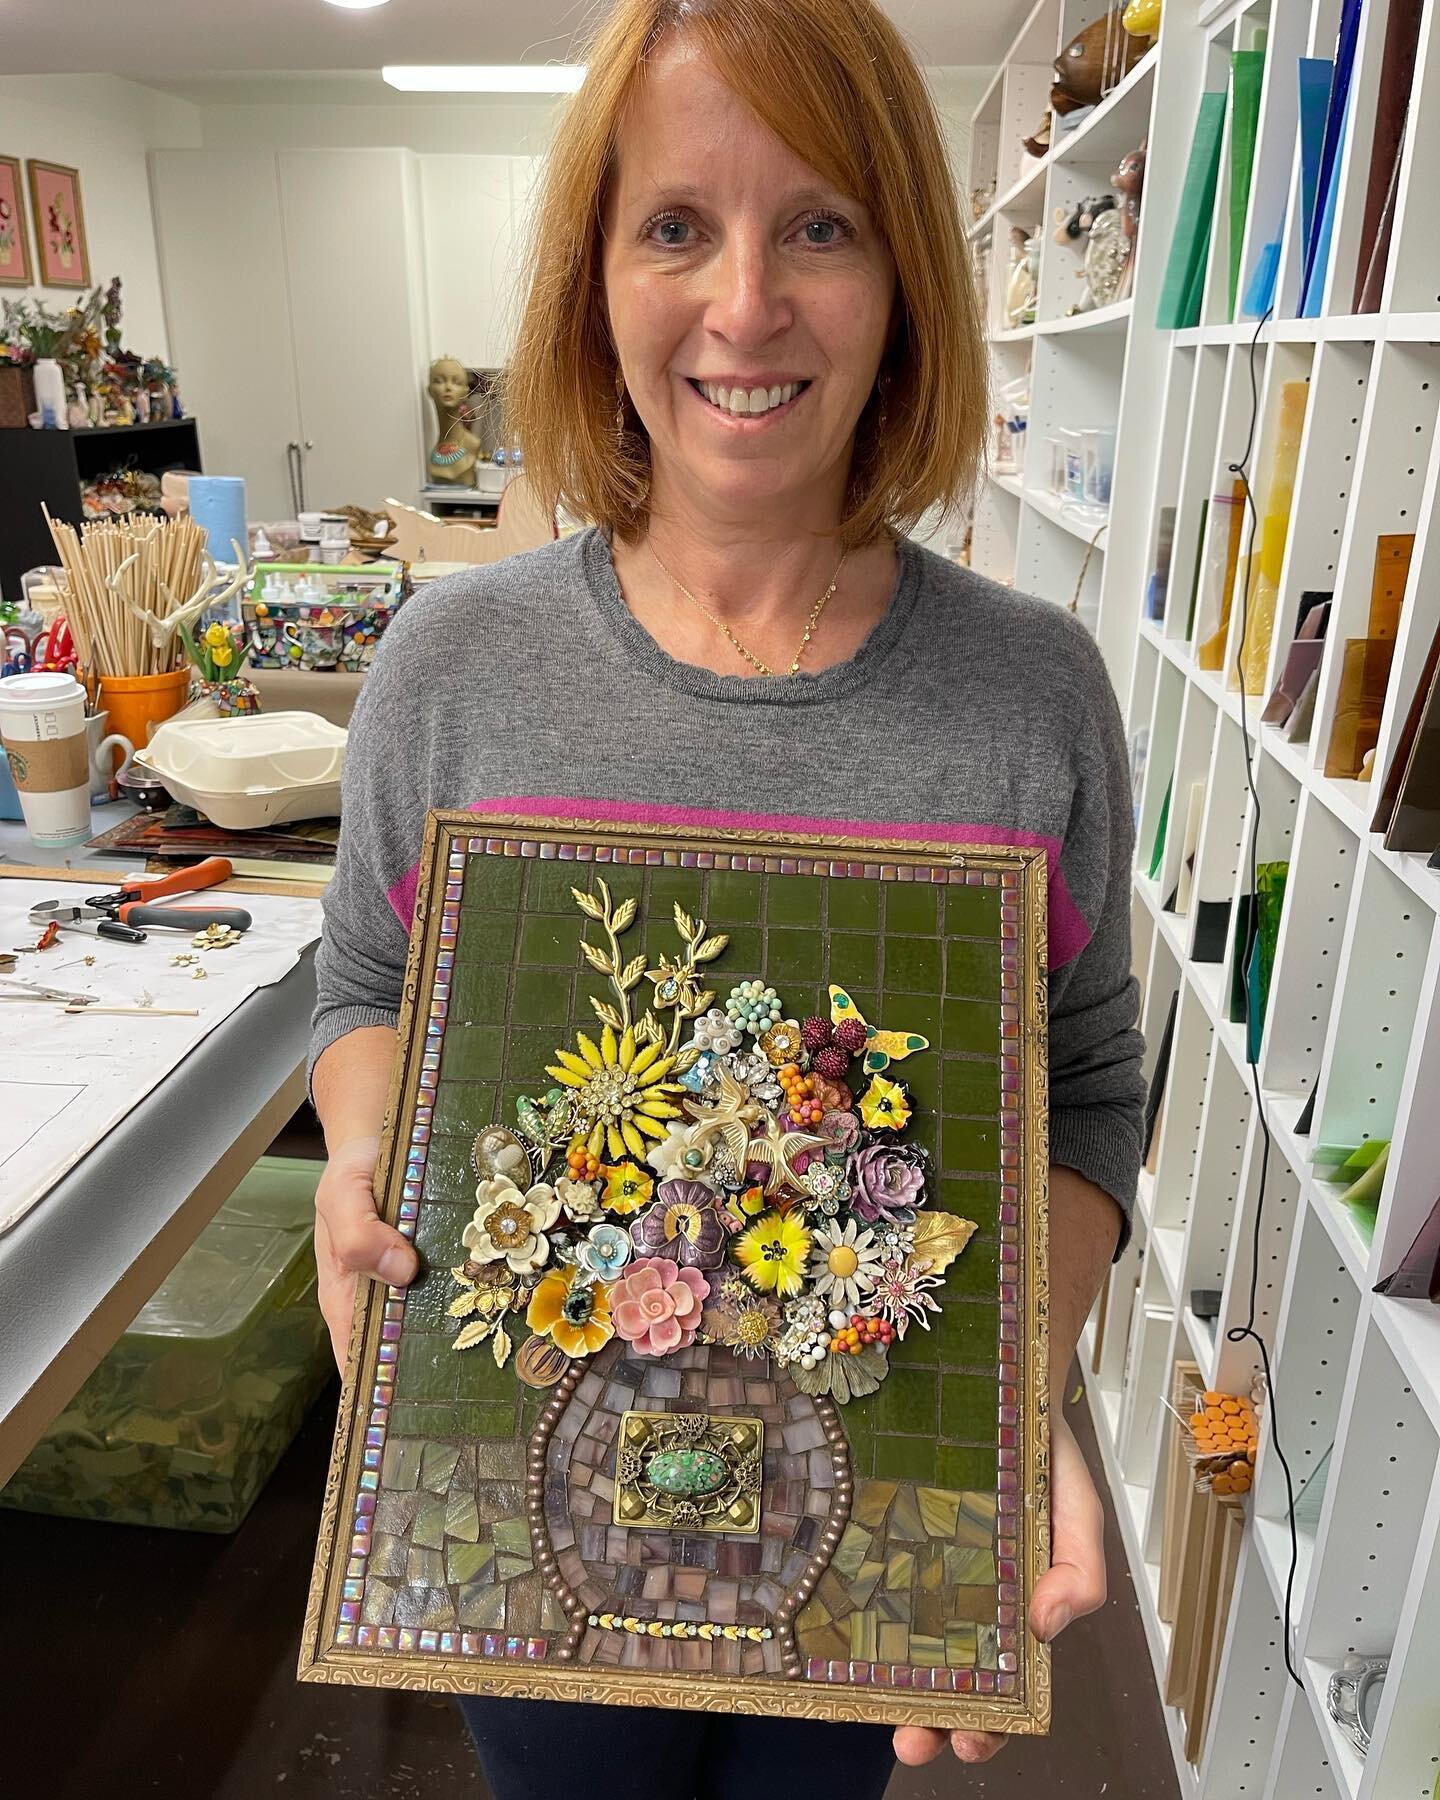 Student Deborah made this in one of my Mosaic Floral workshops. Nov 12/13 you can make one too! Link in bio to register.